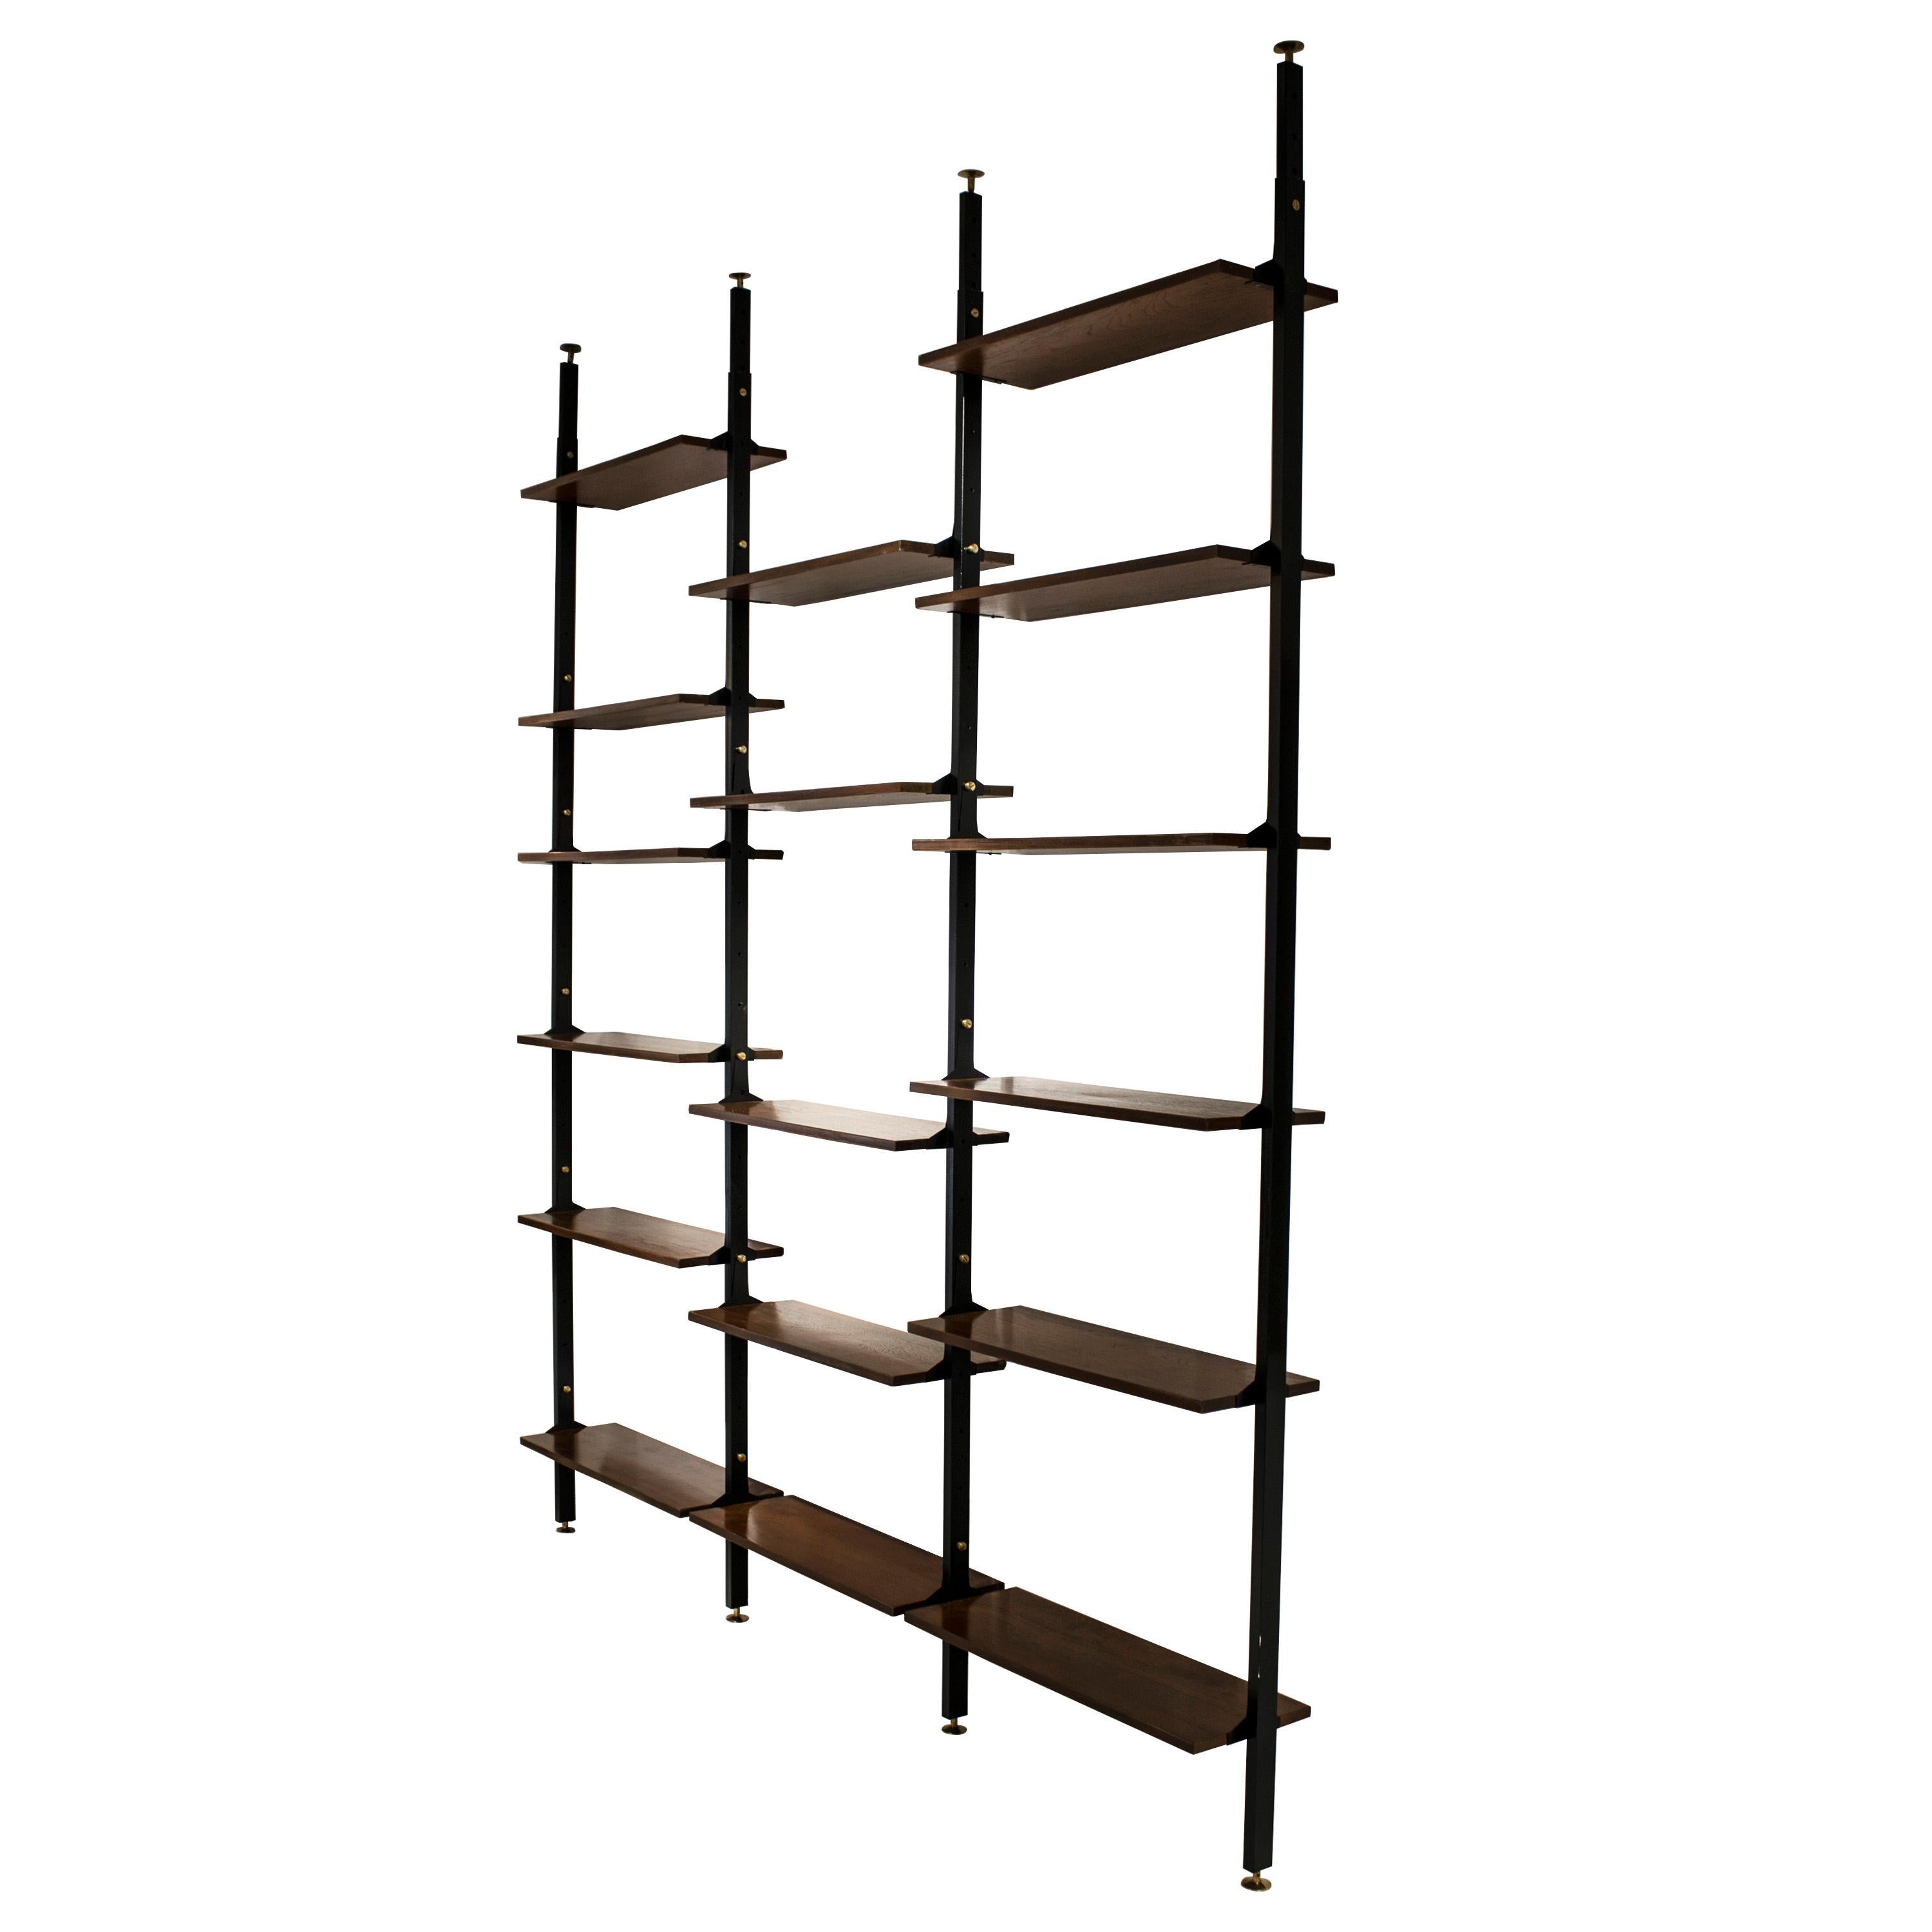 Mid-Century Modern modular shelving. It consists of a height-adjustable black lacquered metal structure with brass lozenge details and teak wood shelves.